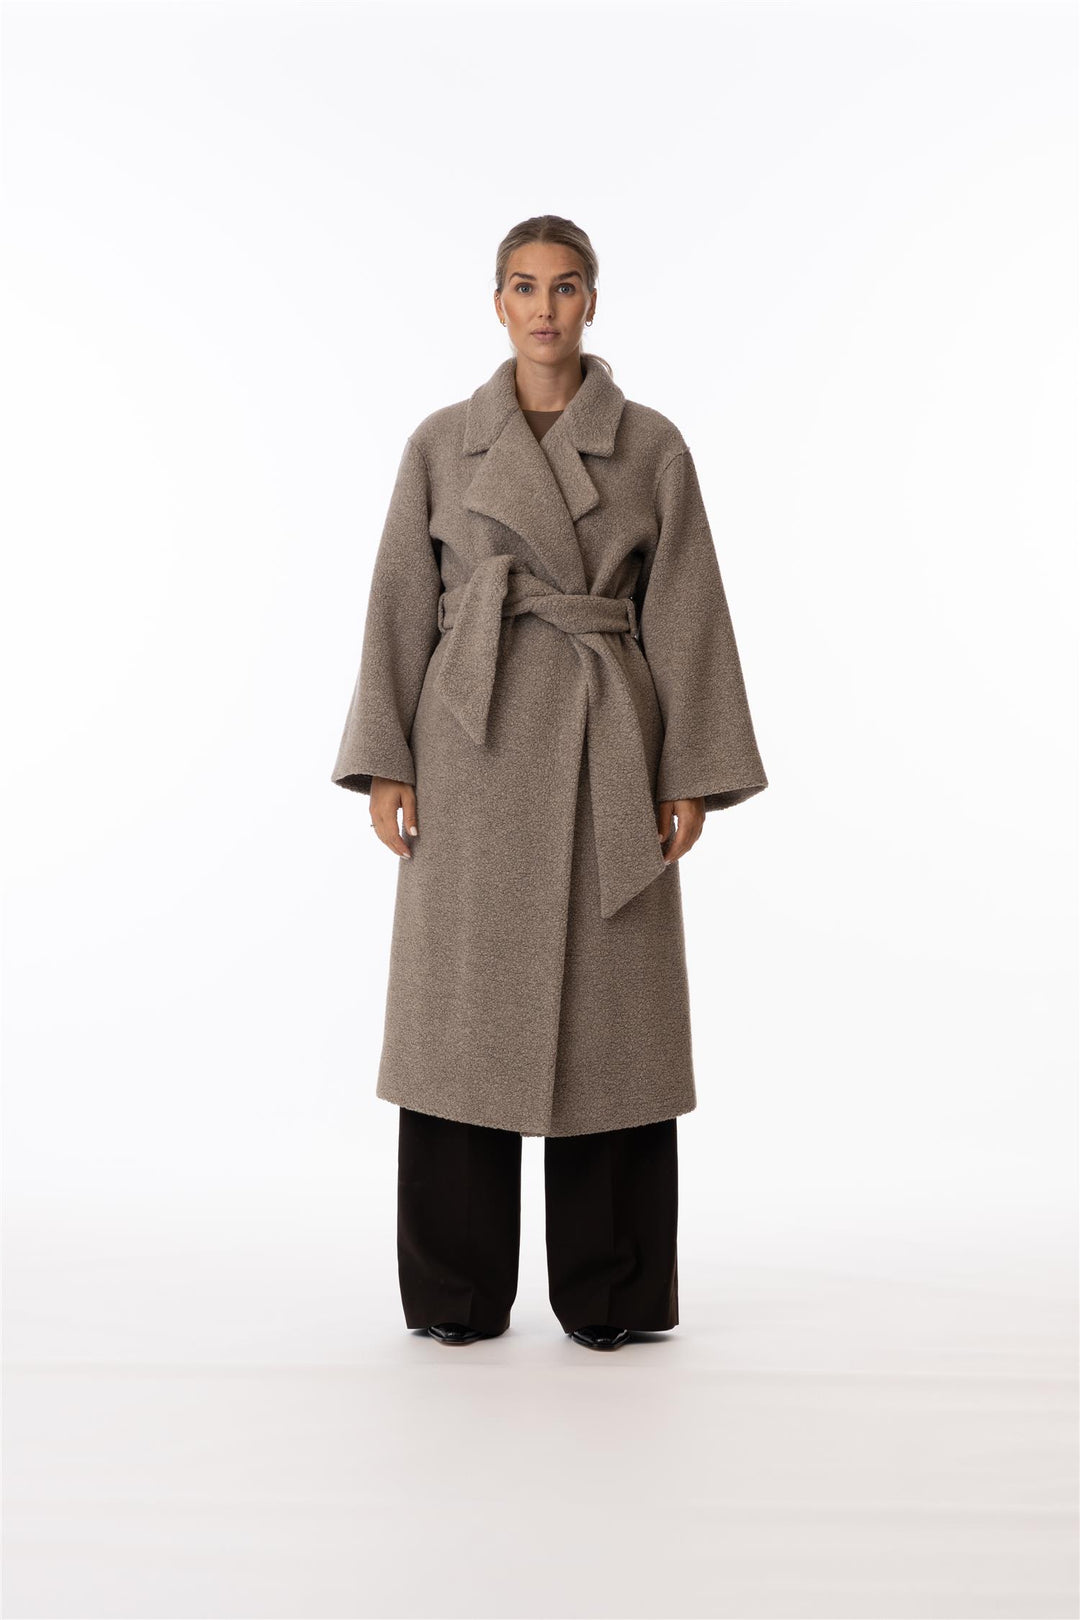 Belted cluth coat bouclé- Taupe-Harris Wharf London-Bogartstore